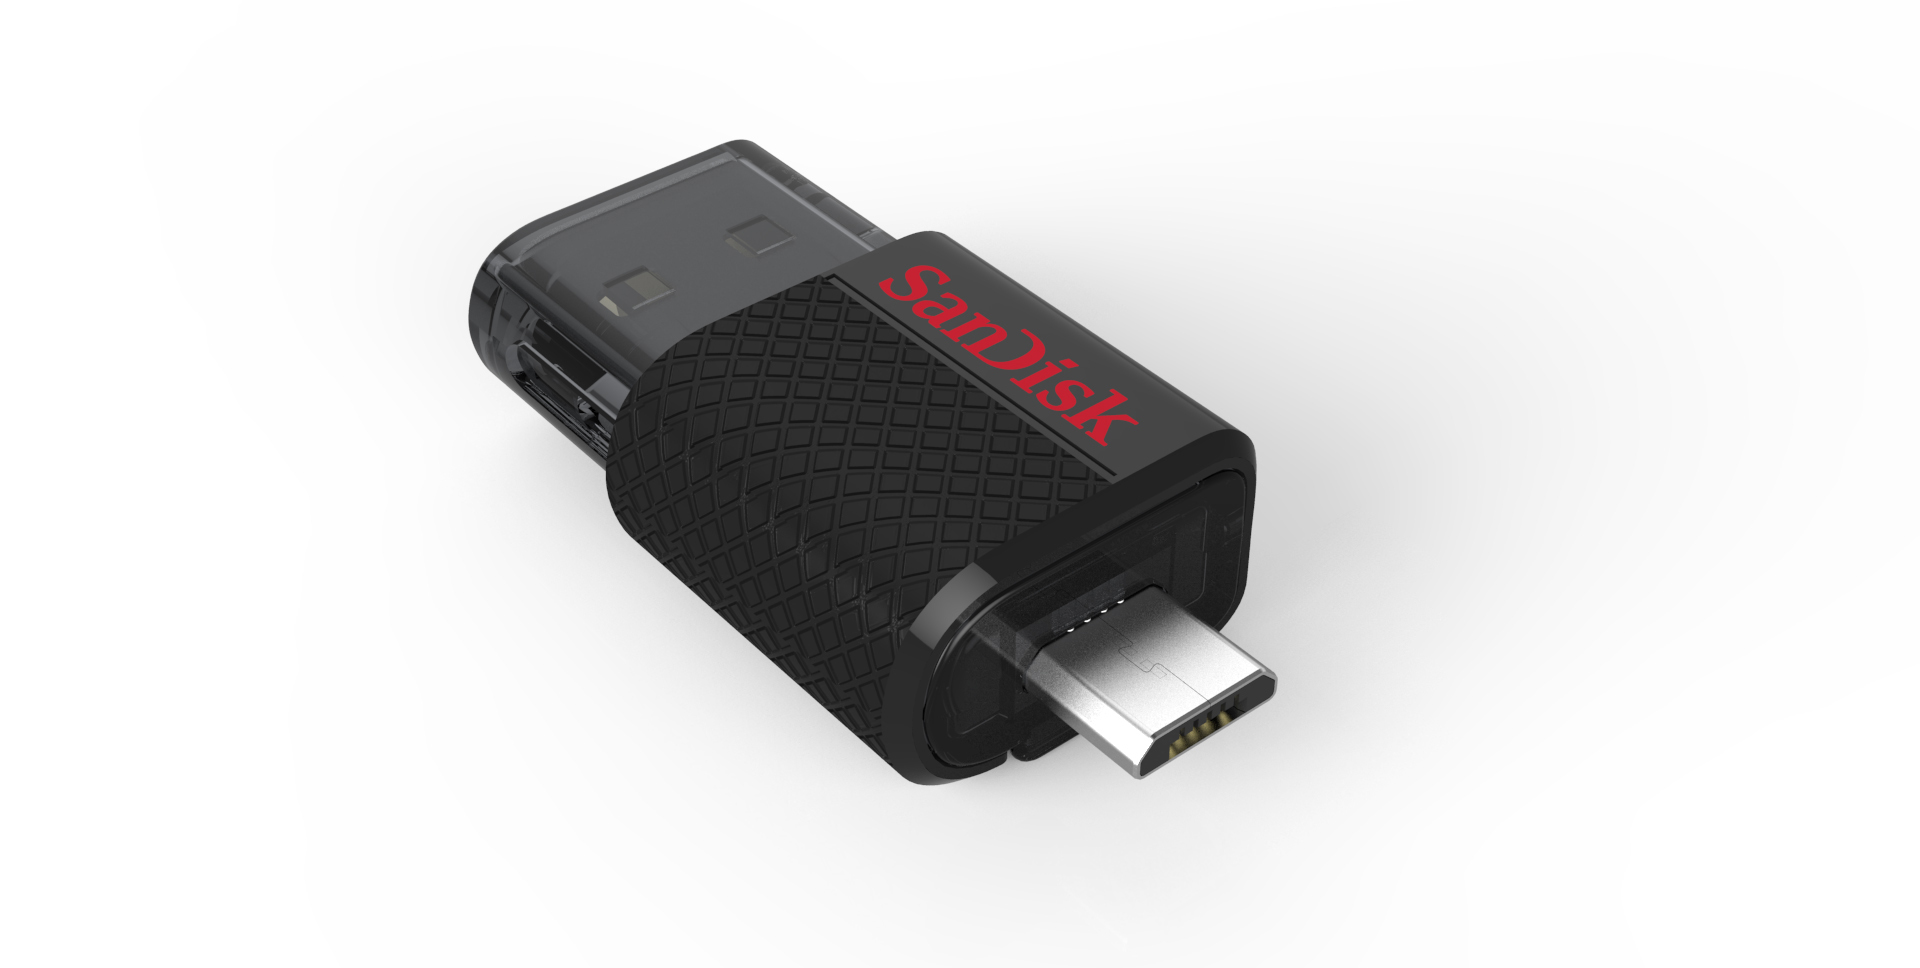 eksil Supersonic hastighed Imagination SanDisk Announces Its First Dual USB Drive Designed to Transfer and Backup  Content Between Mobile Devices and Computers | Business Wire